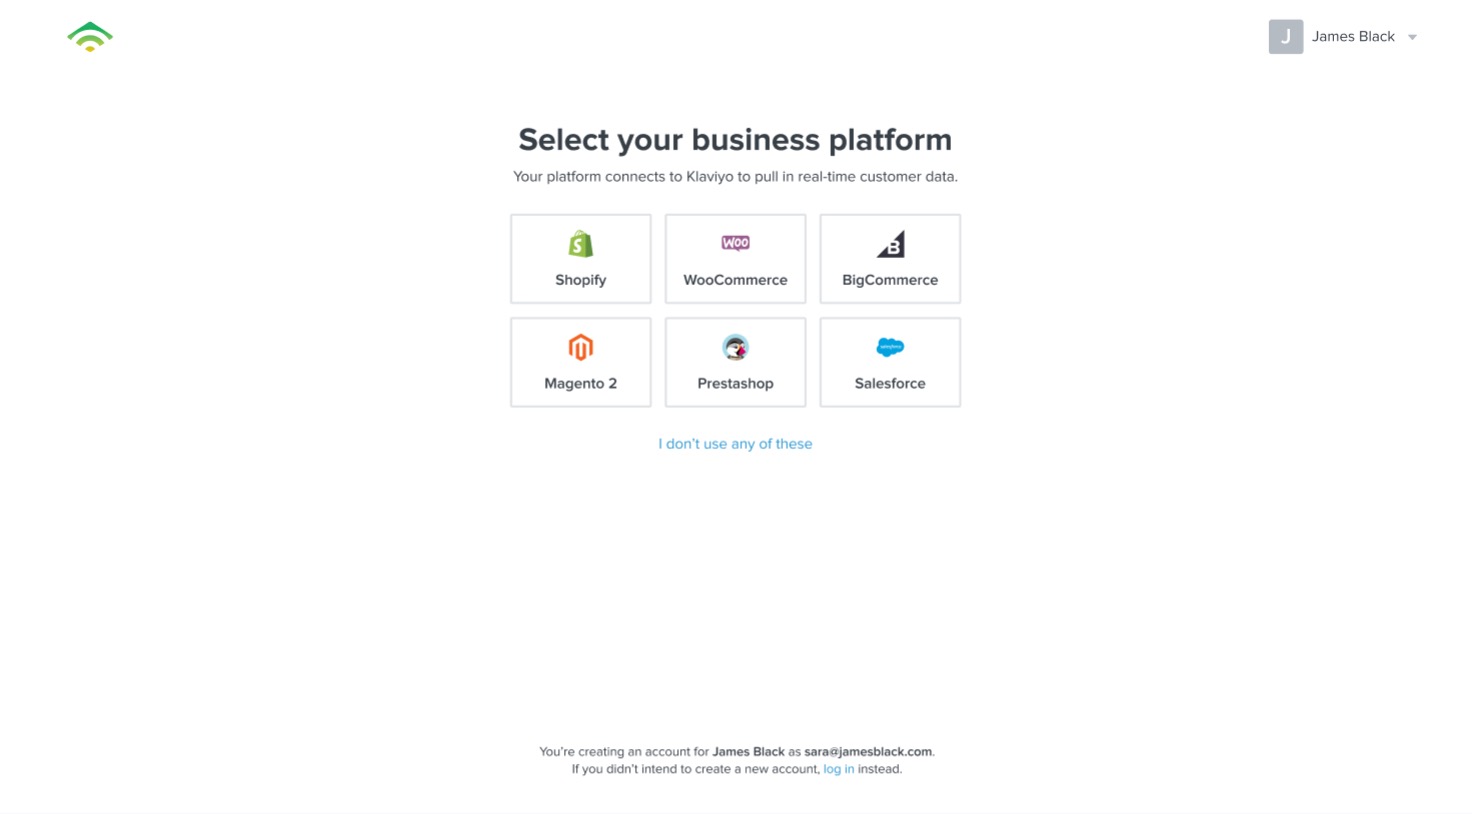 View of the connect your business ecommerce platform manually with additional platforms to choose from